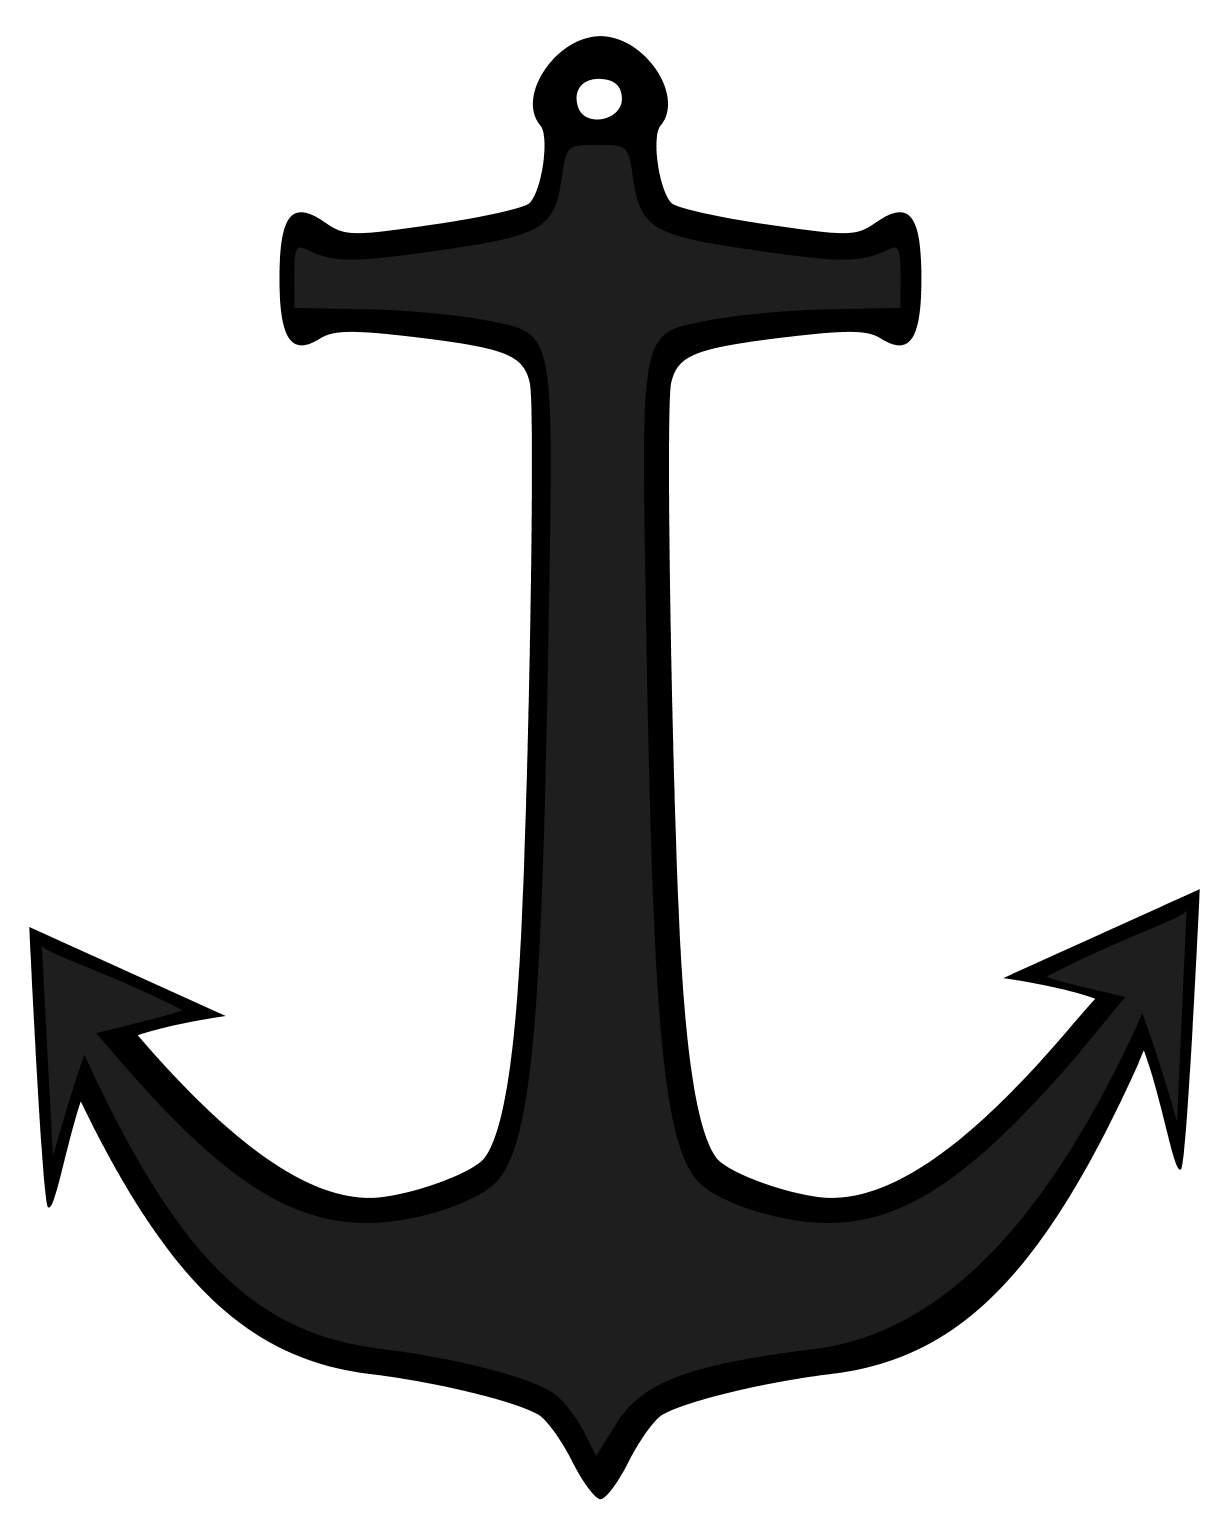 Clipart free anchor. Png images download